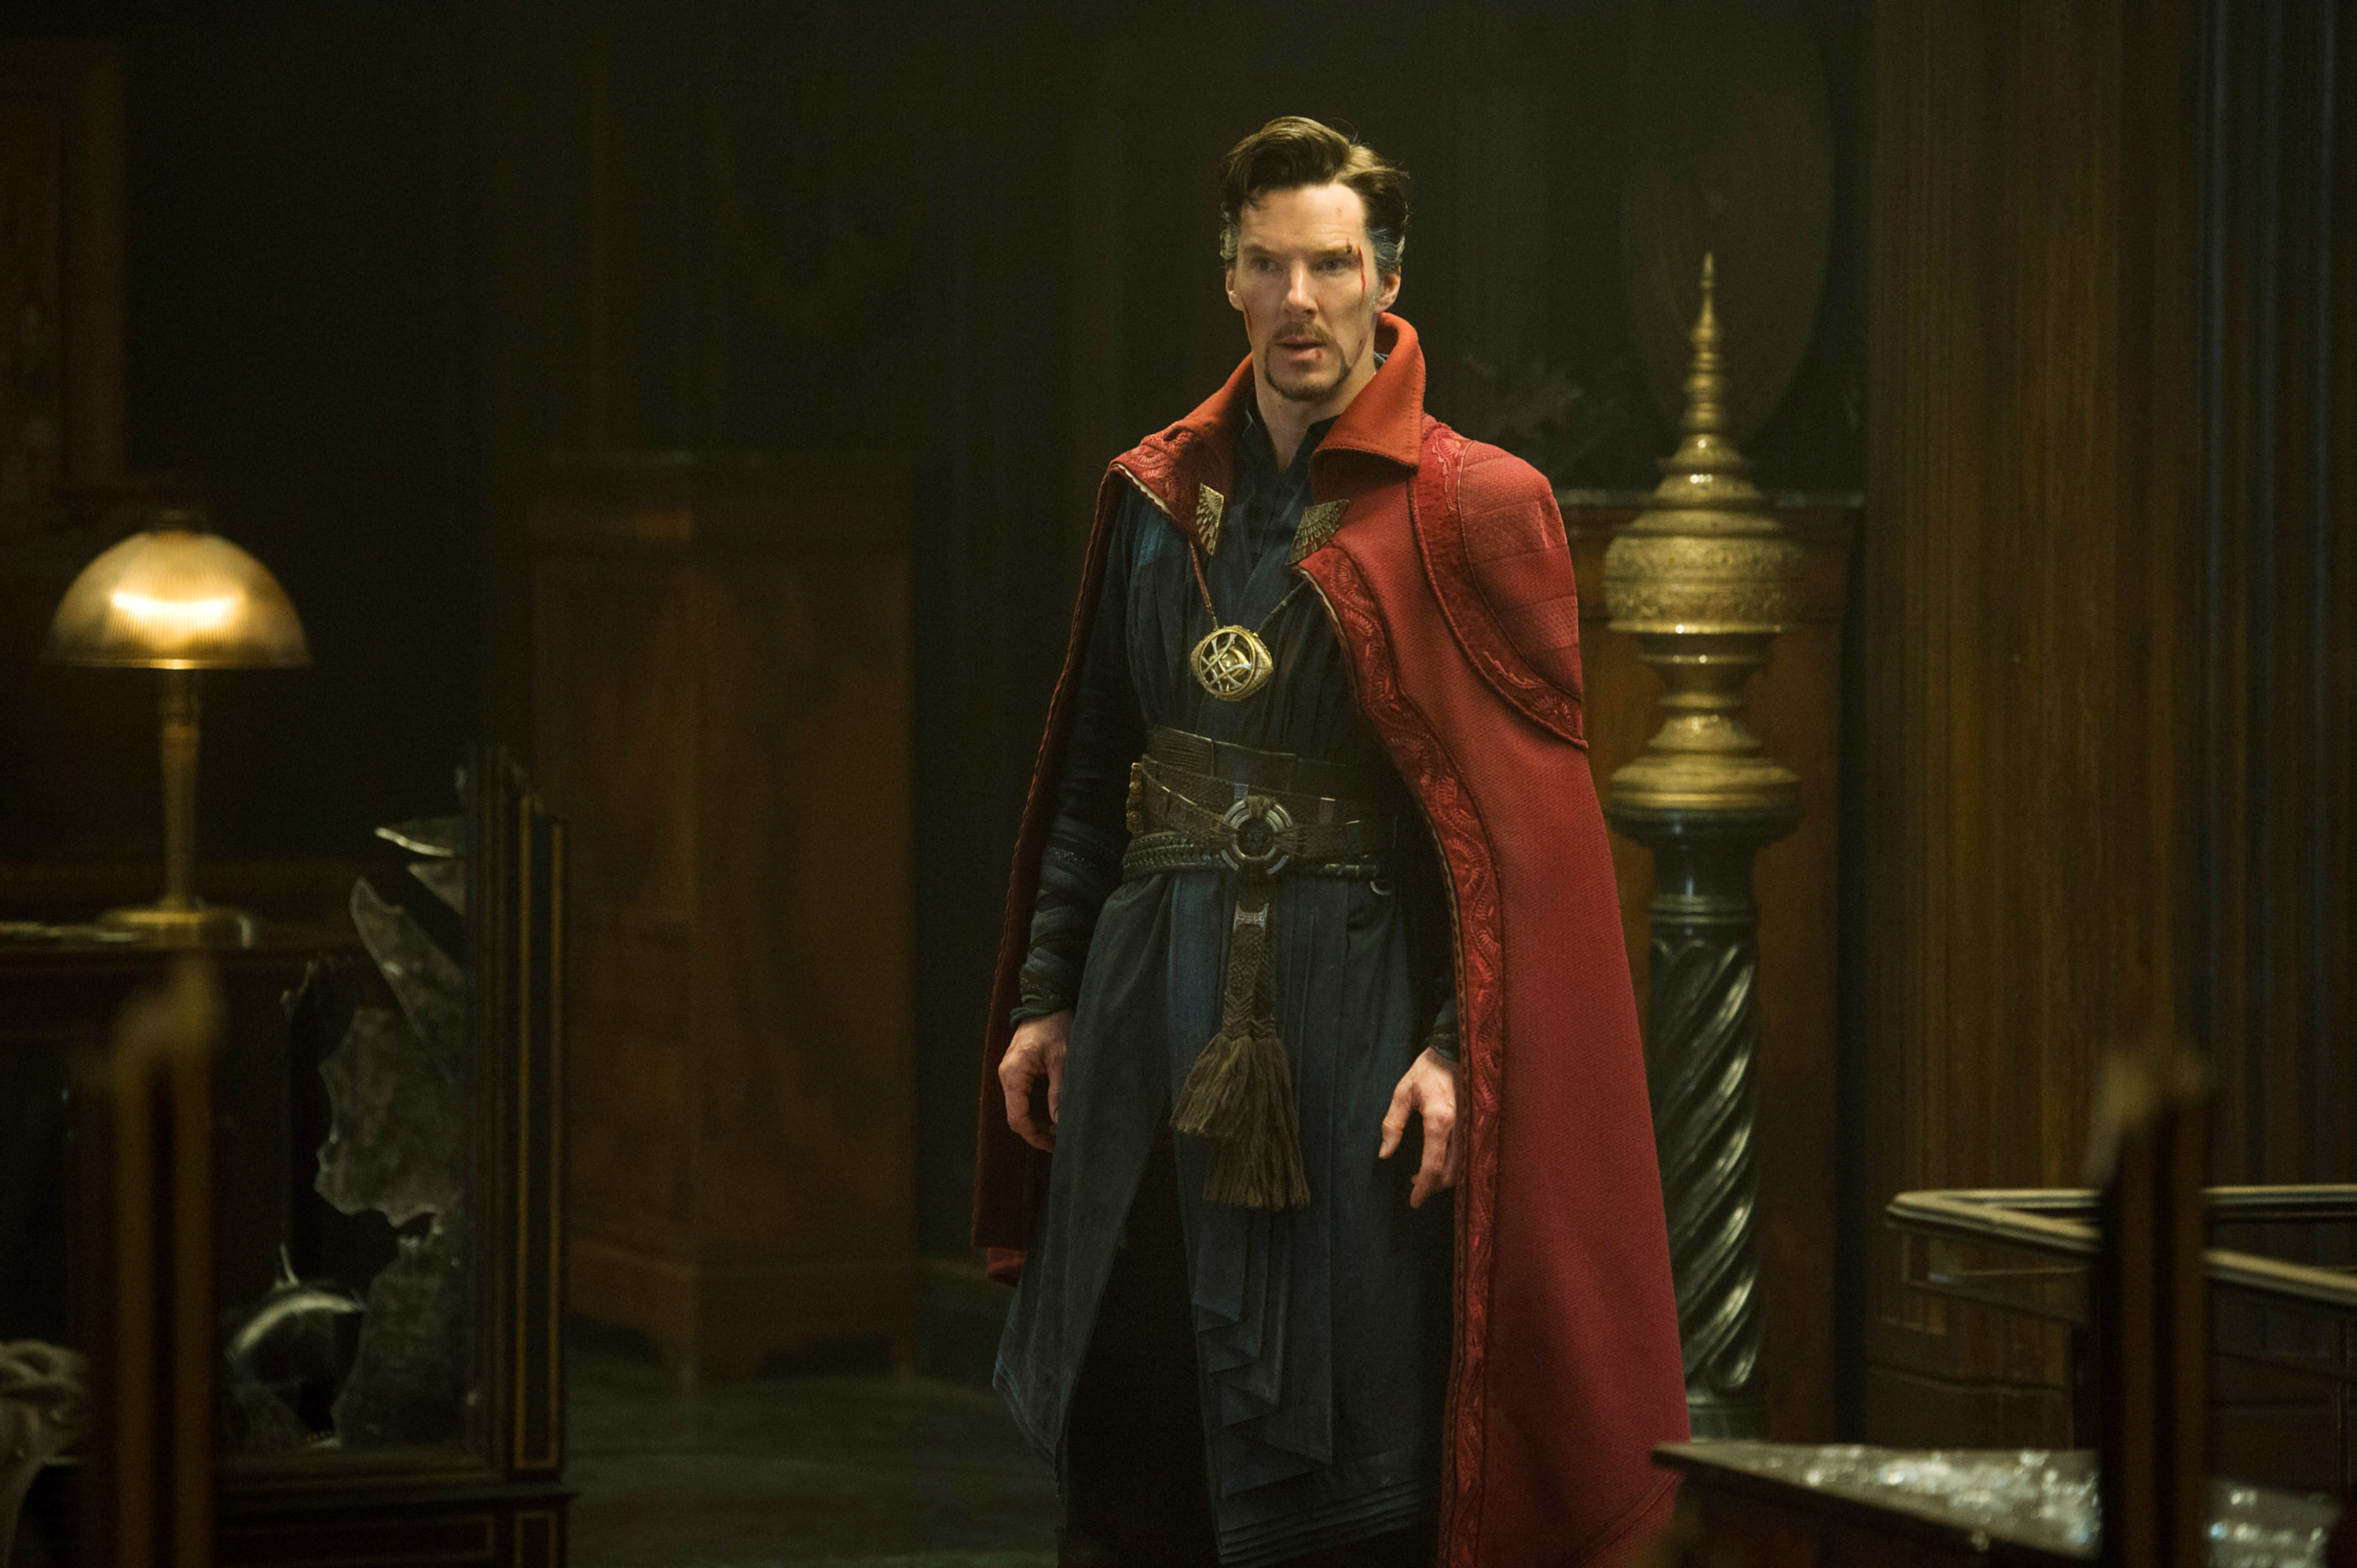 Doctor Strange wearing his classic outfit